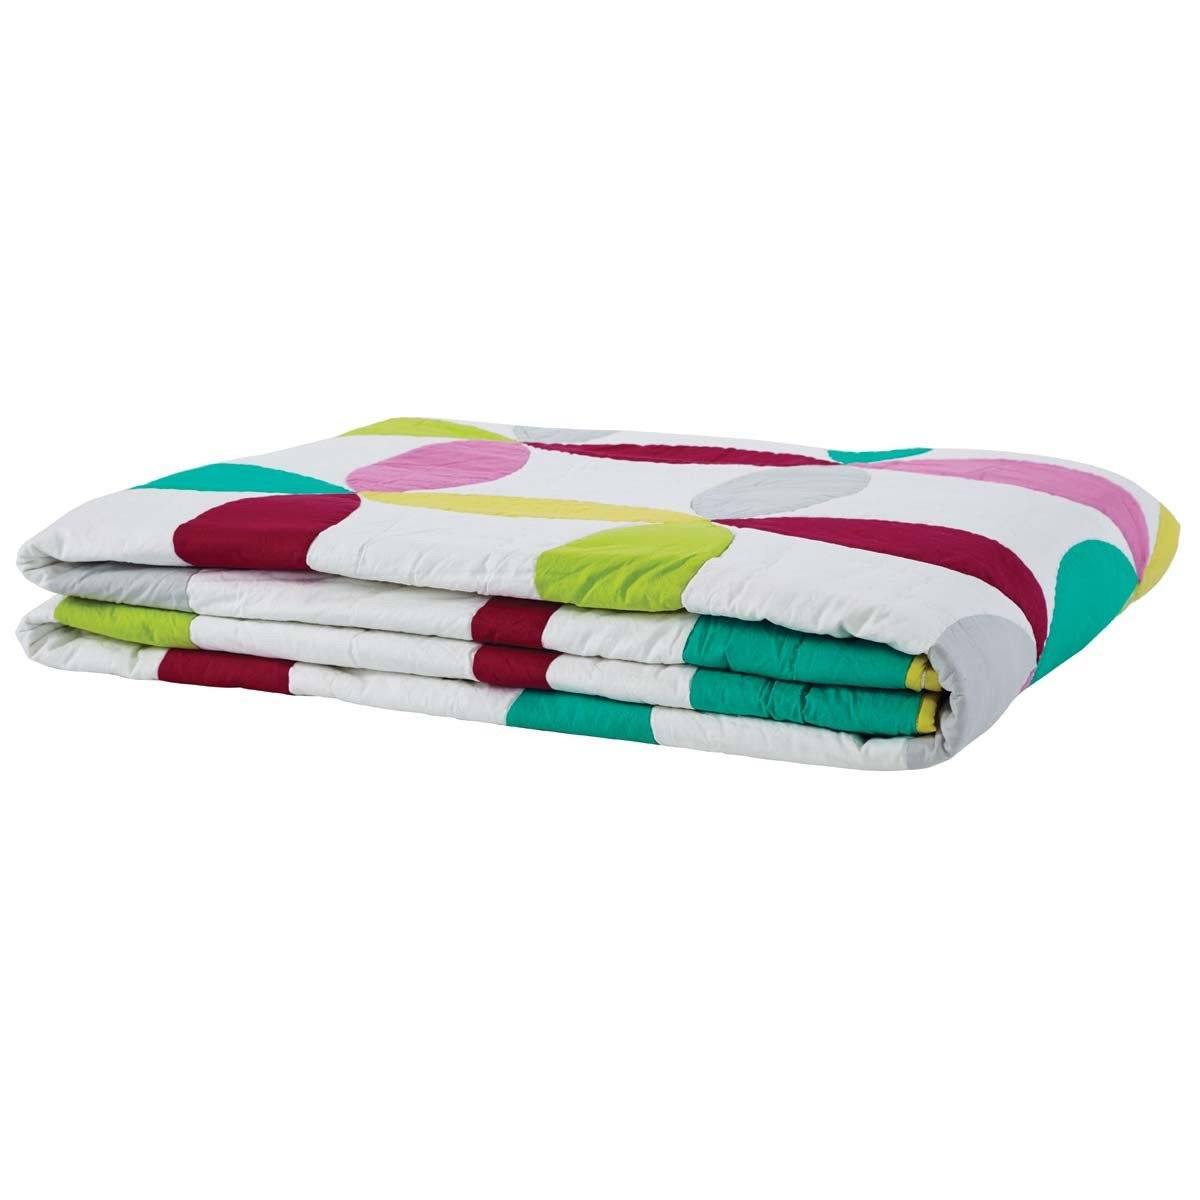 Everly Queen Set; Quilt 90Wx90L-2 Shams 21x27 VHC Brands folded